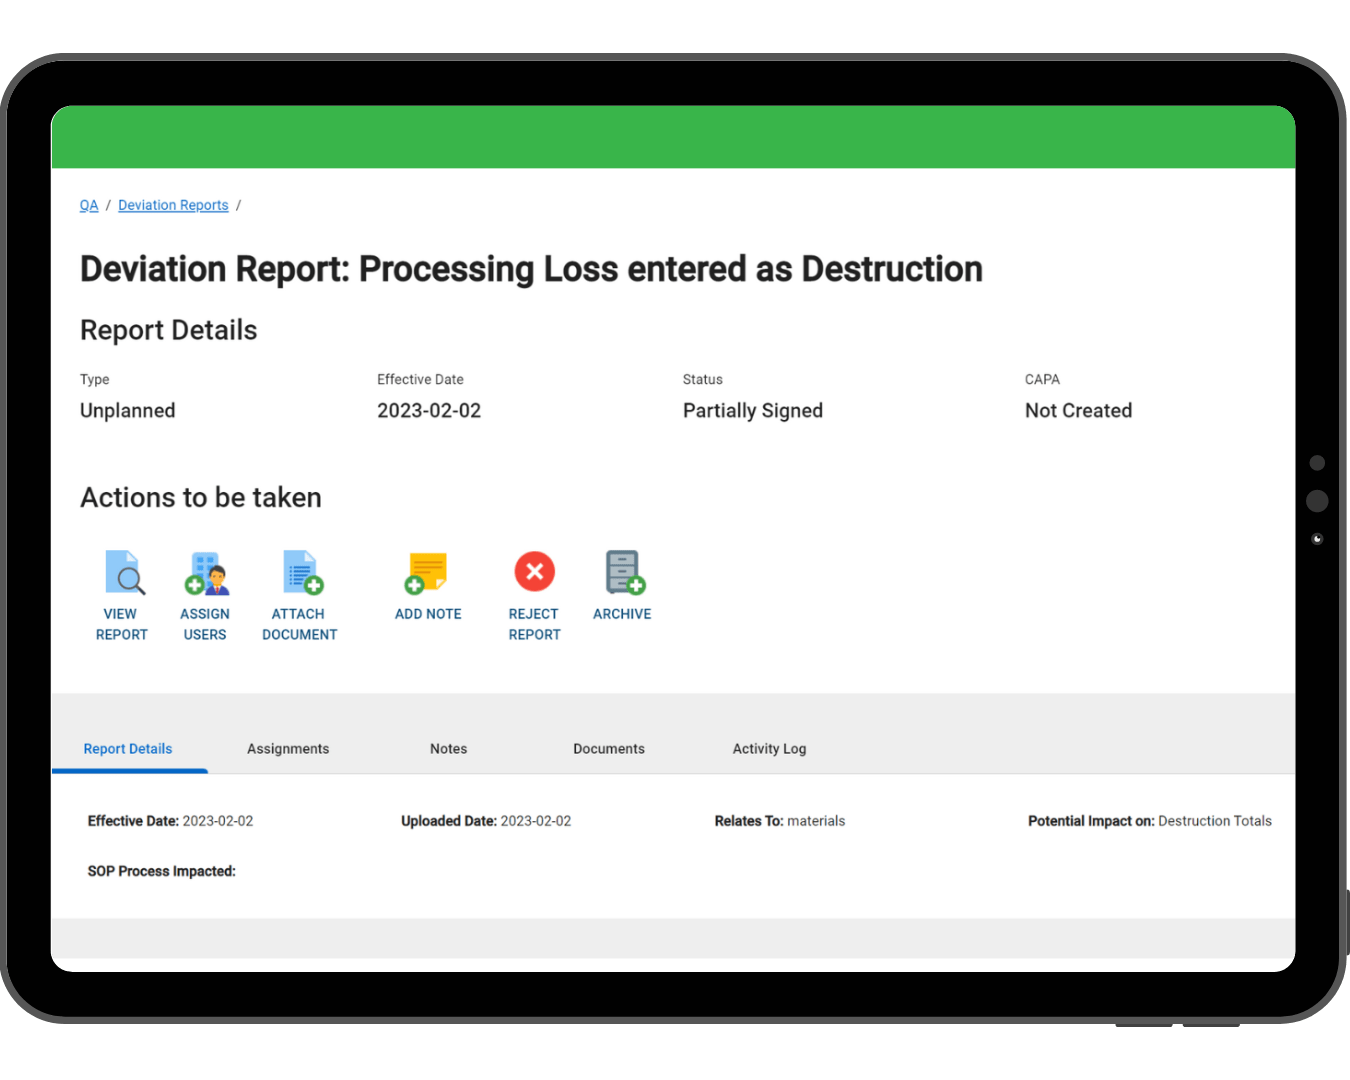 Cannabis Production Software | Record your destruction and deviation reports in minutes.